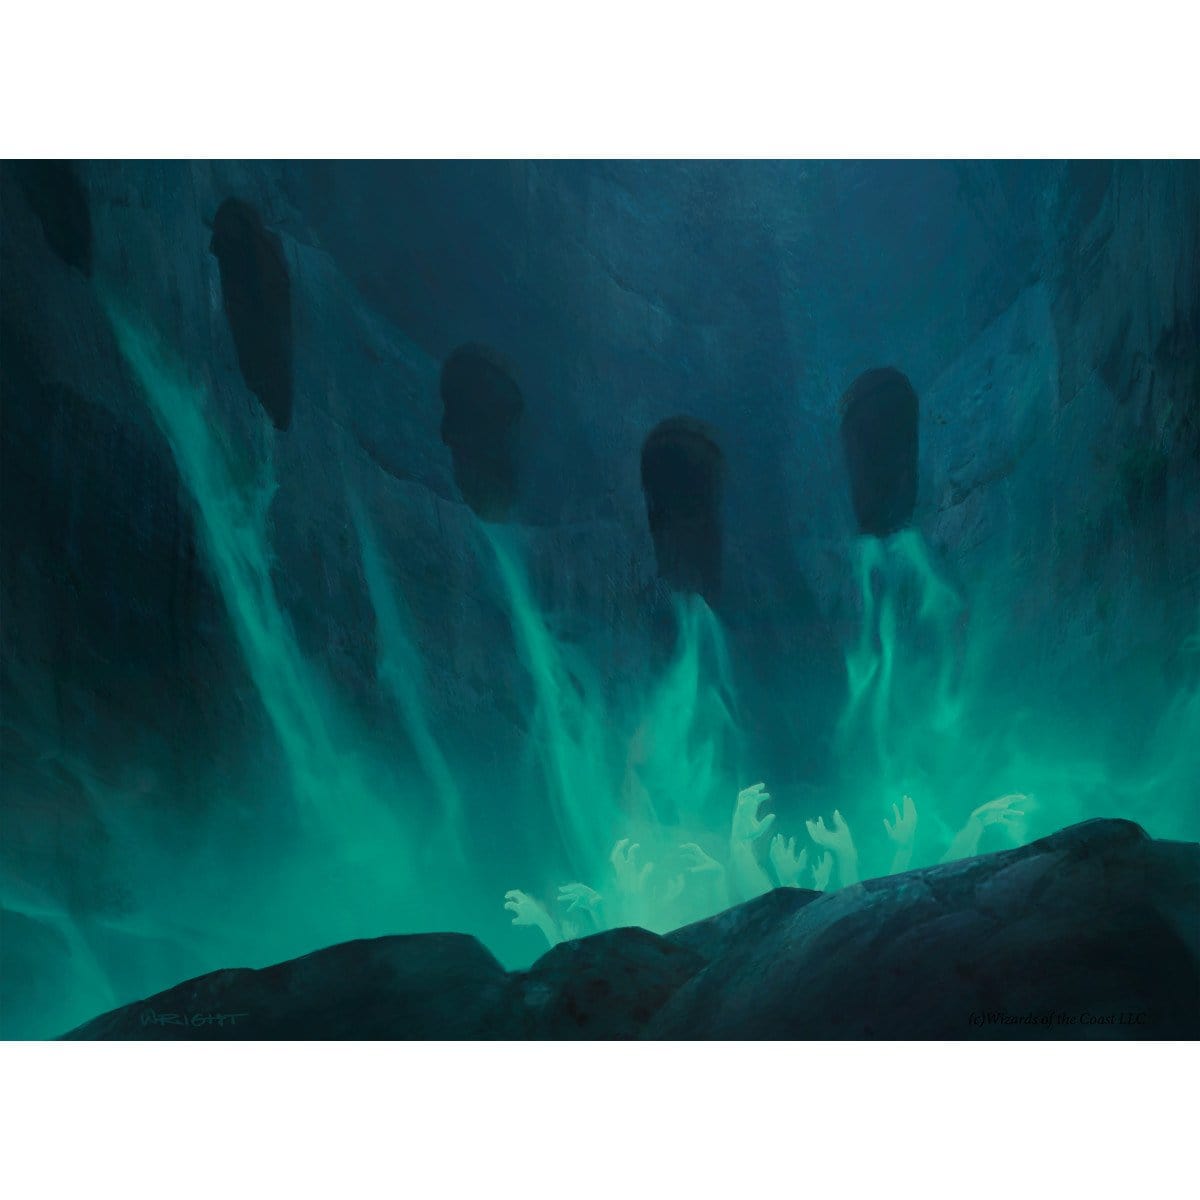 Cavern of Souls Print - Print - Original Magic Art - Accessories for Magic the Gathering and other card games